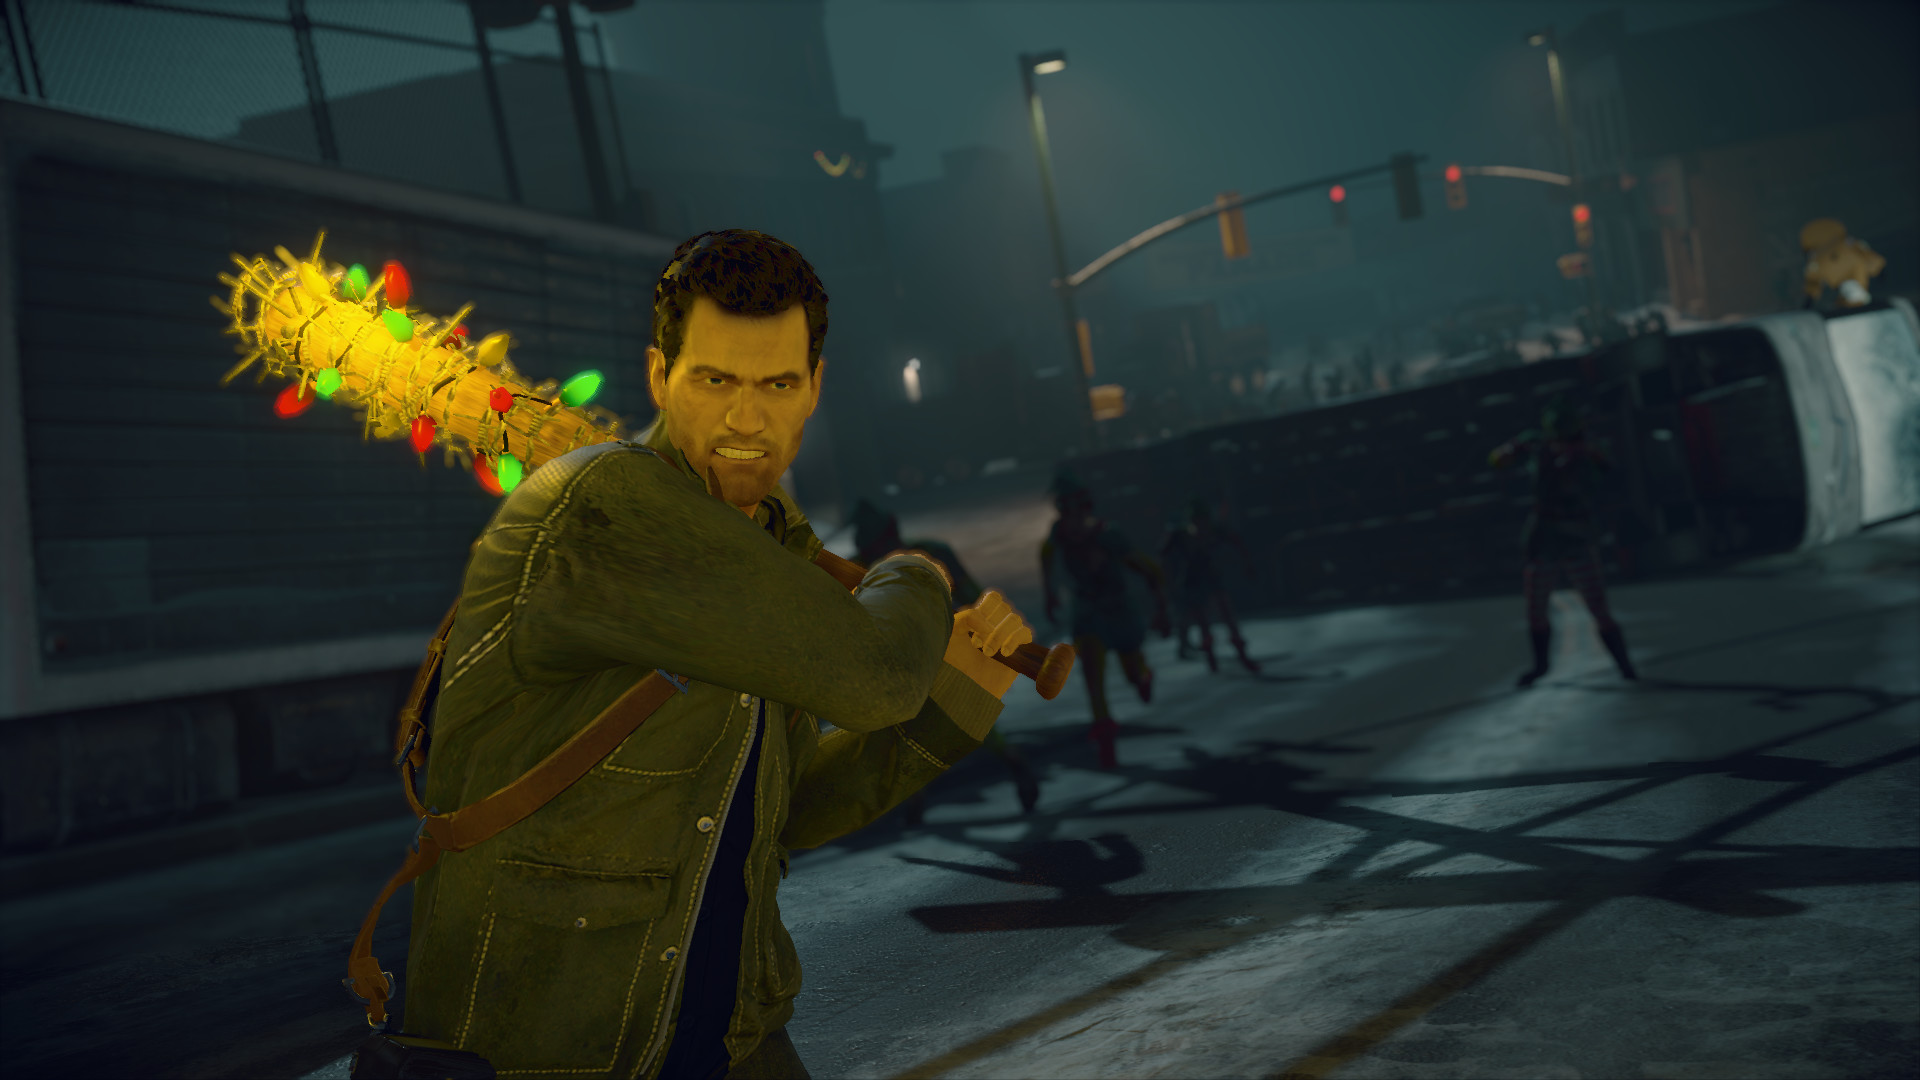 Dead Rising 4 - Holiday Stocking Stuffer Pack Featured Screenshot #1